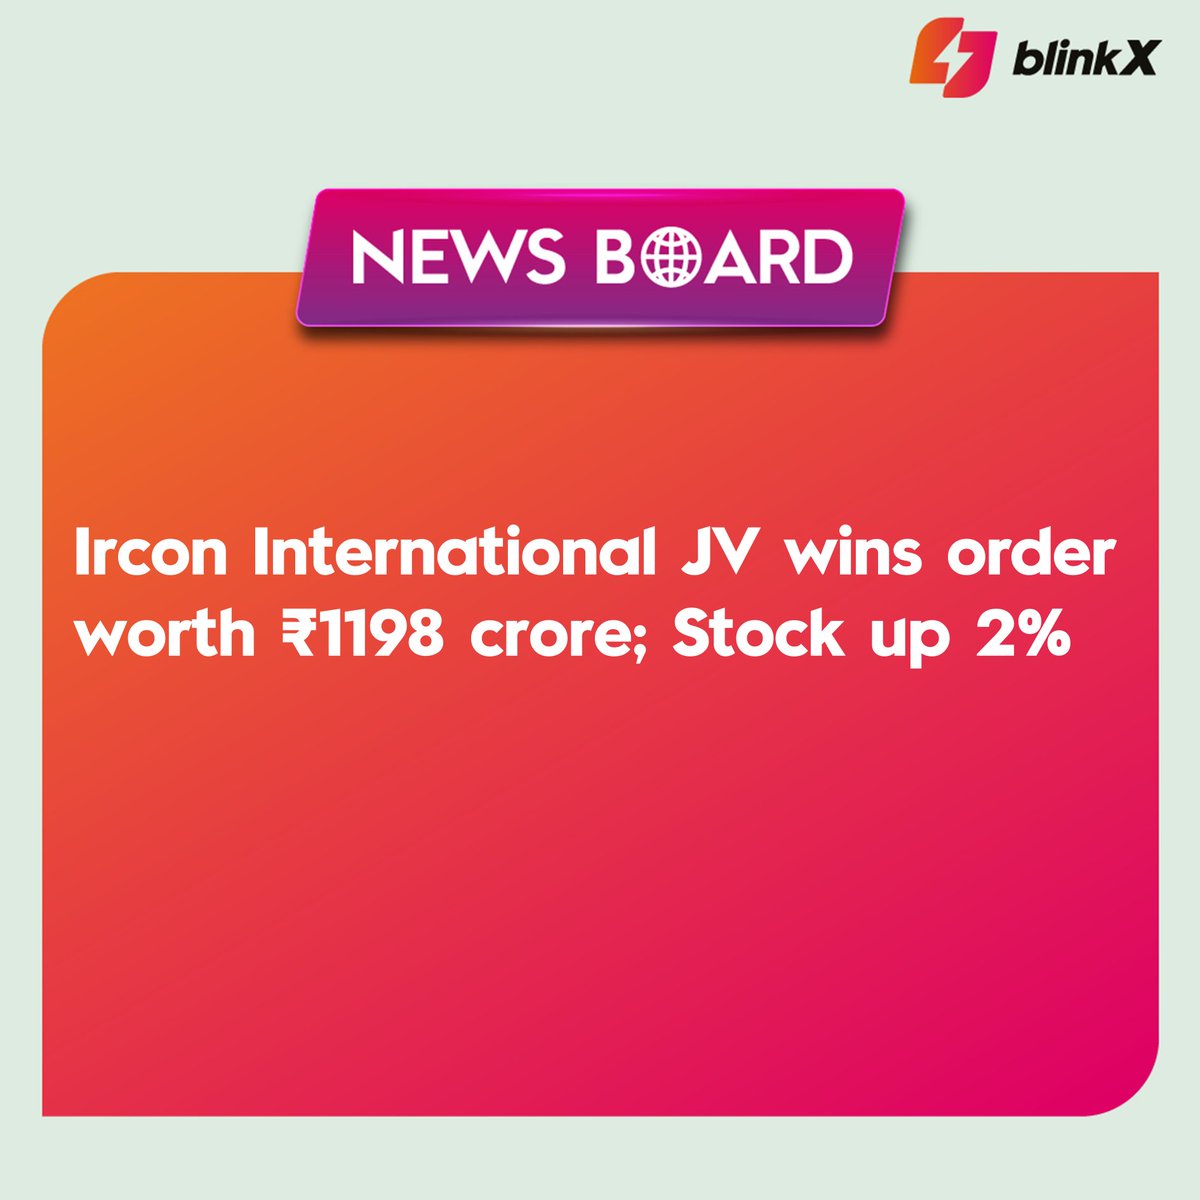 IRCON under its Joint Venture with Dineshchandra R Agrawal Infracon Pvt Ltd has been awarded the LOA.

#IRCON #JV #jointventure #IRCONInternational #project #agreement #contract #order #deal #Engineering #manufacturer #Infrastructure #rupee #launch #news #finance #marketupdates